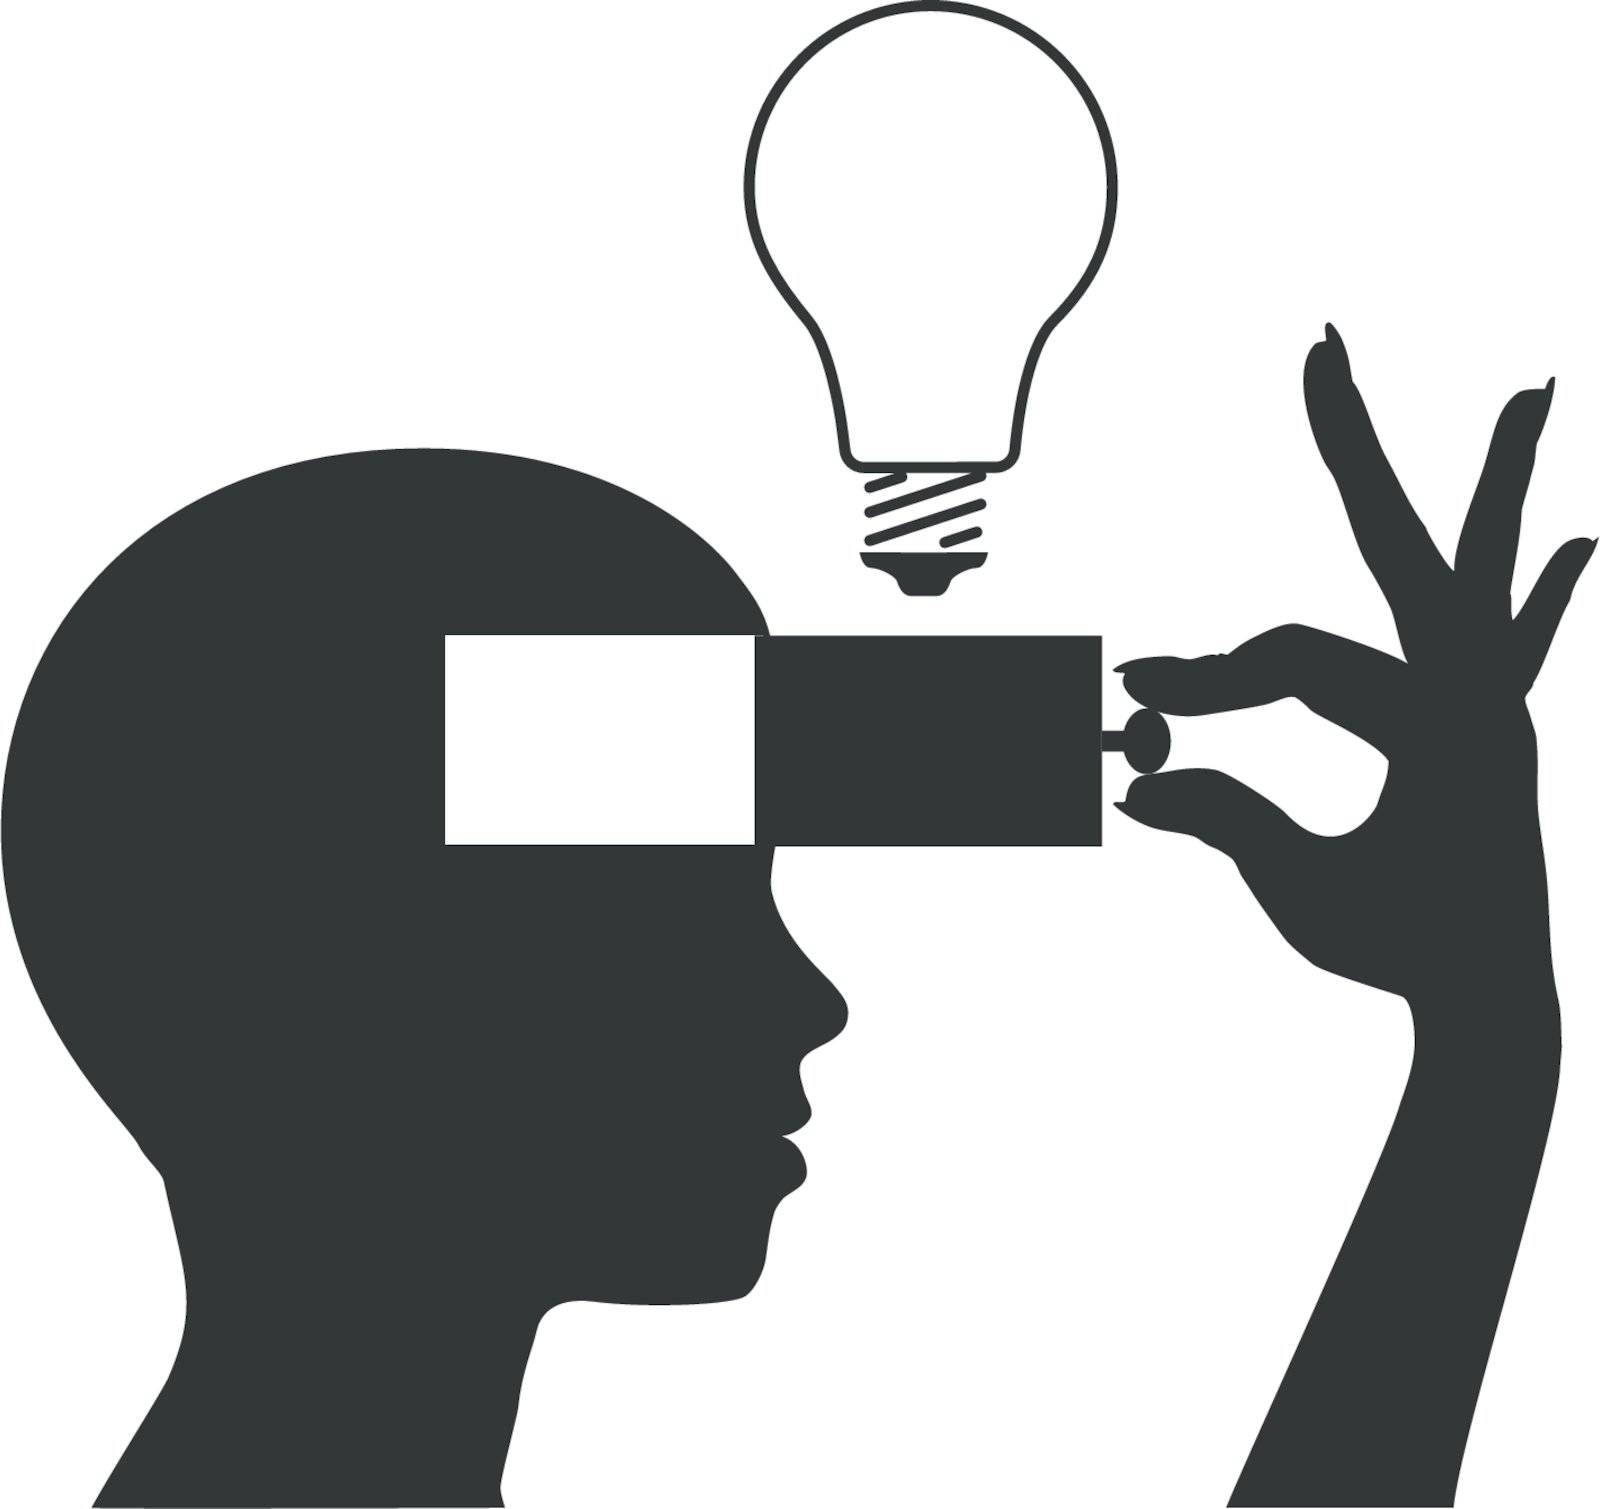 Person learning or inventing a new idea into an open mind